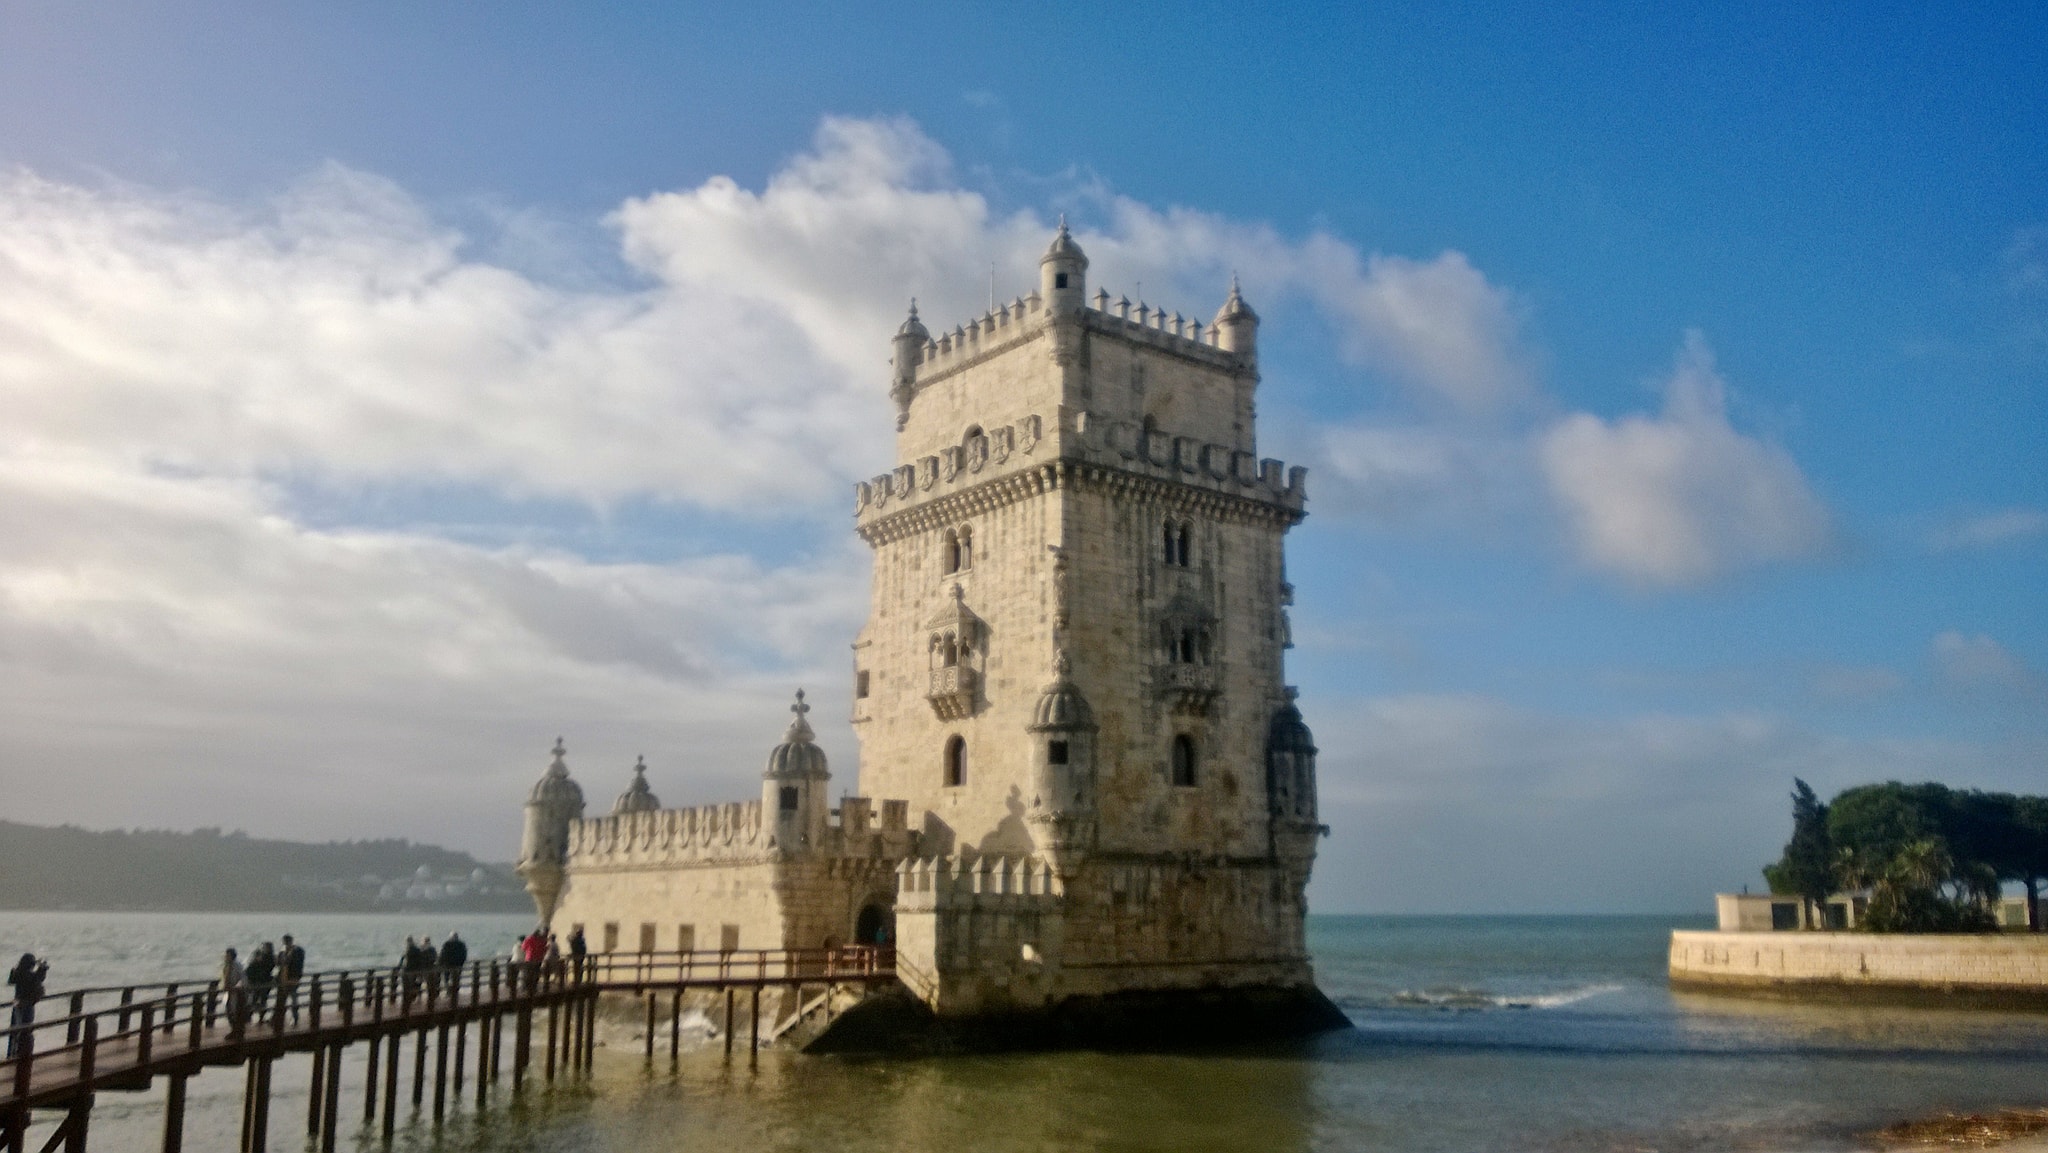 Belem Tower in Lisbon - capital city of Portugal